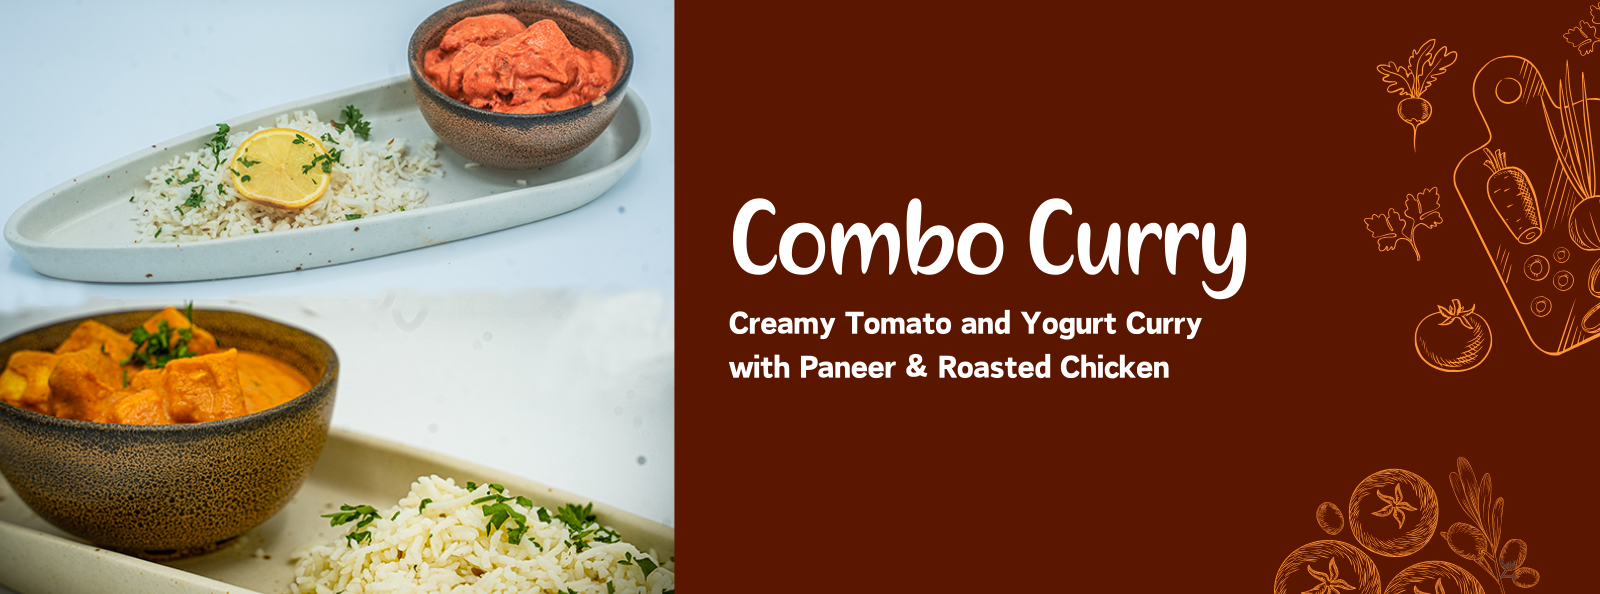 Combo Curry